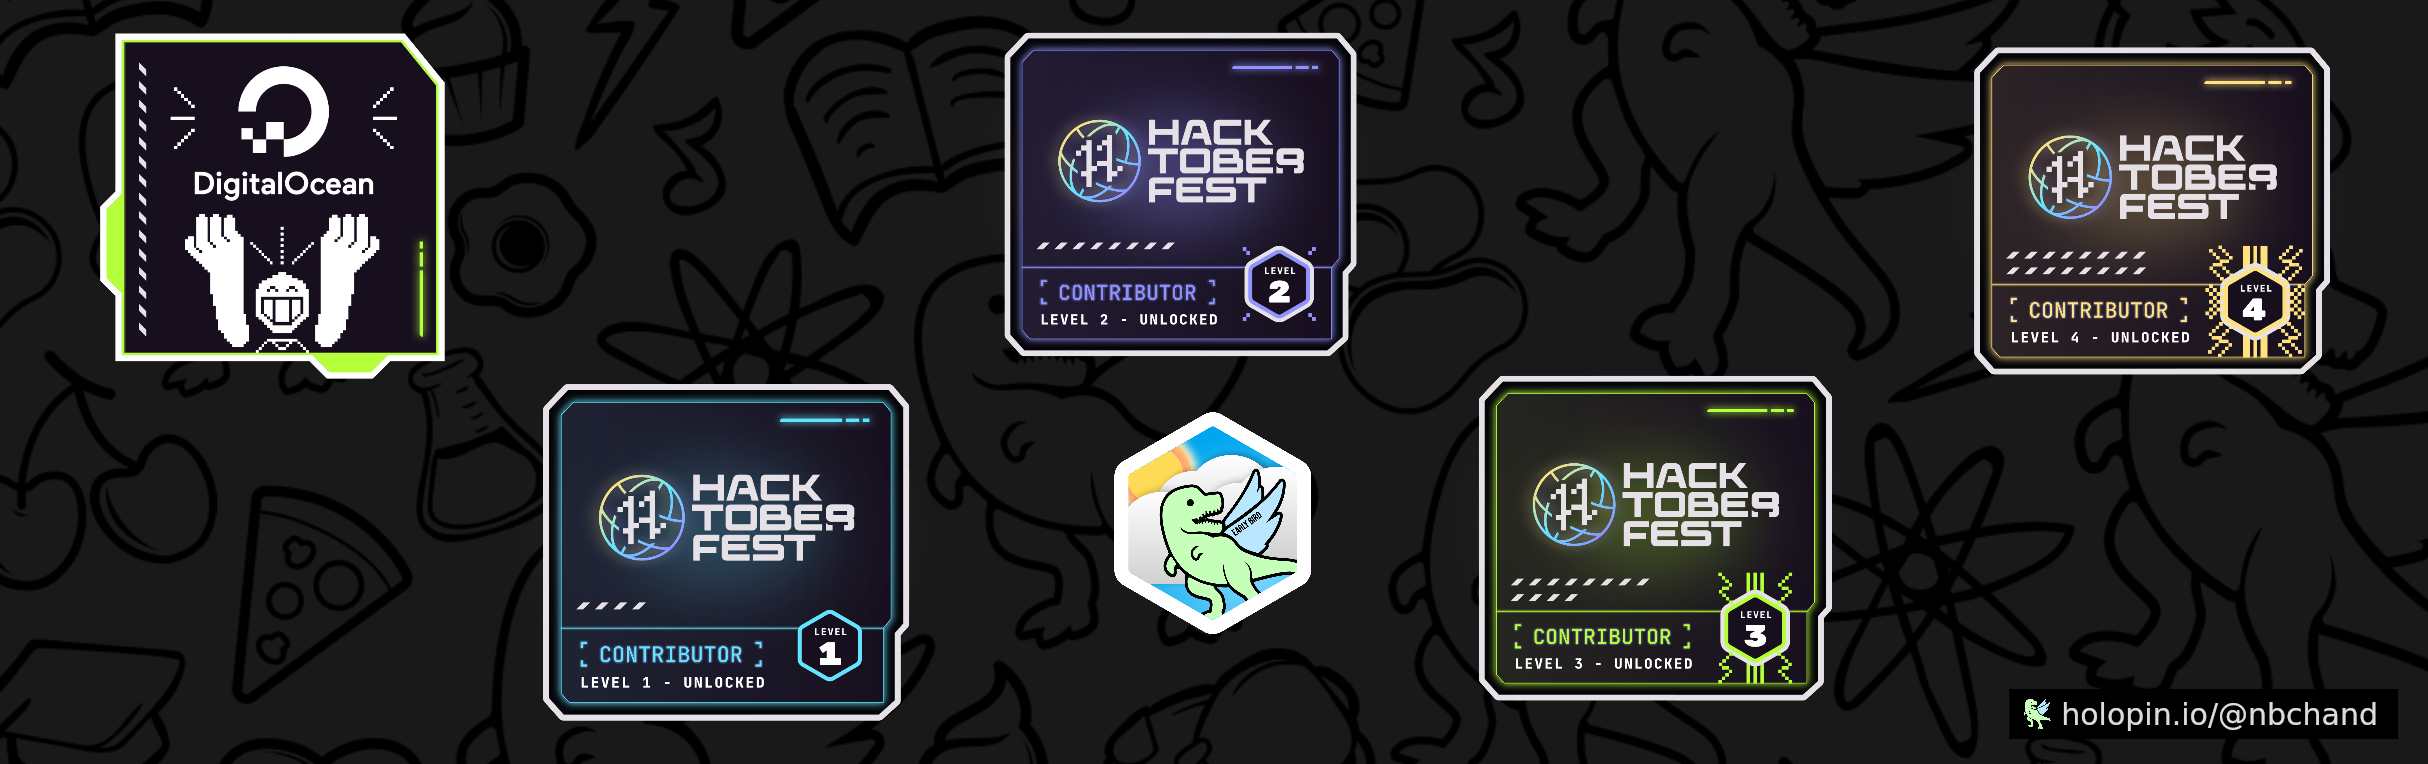 An image of @nbchand's Holopin badges, which is a link to view their full Holopin profile